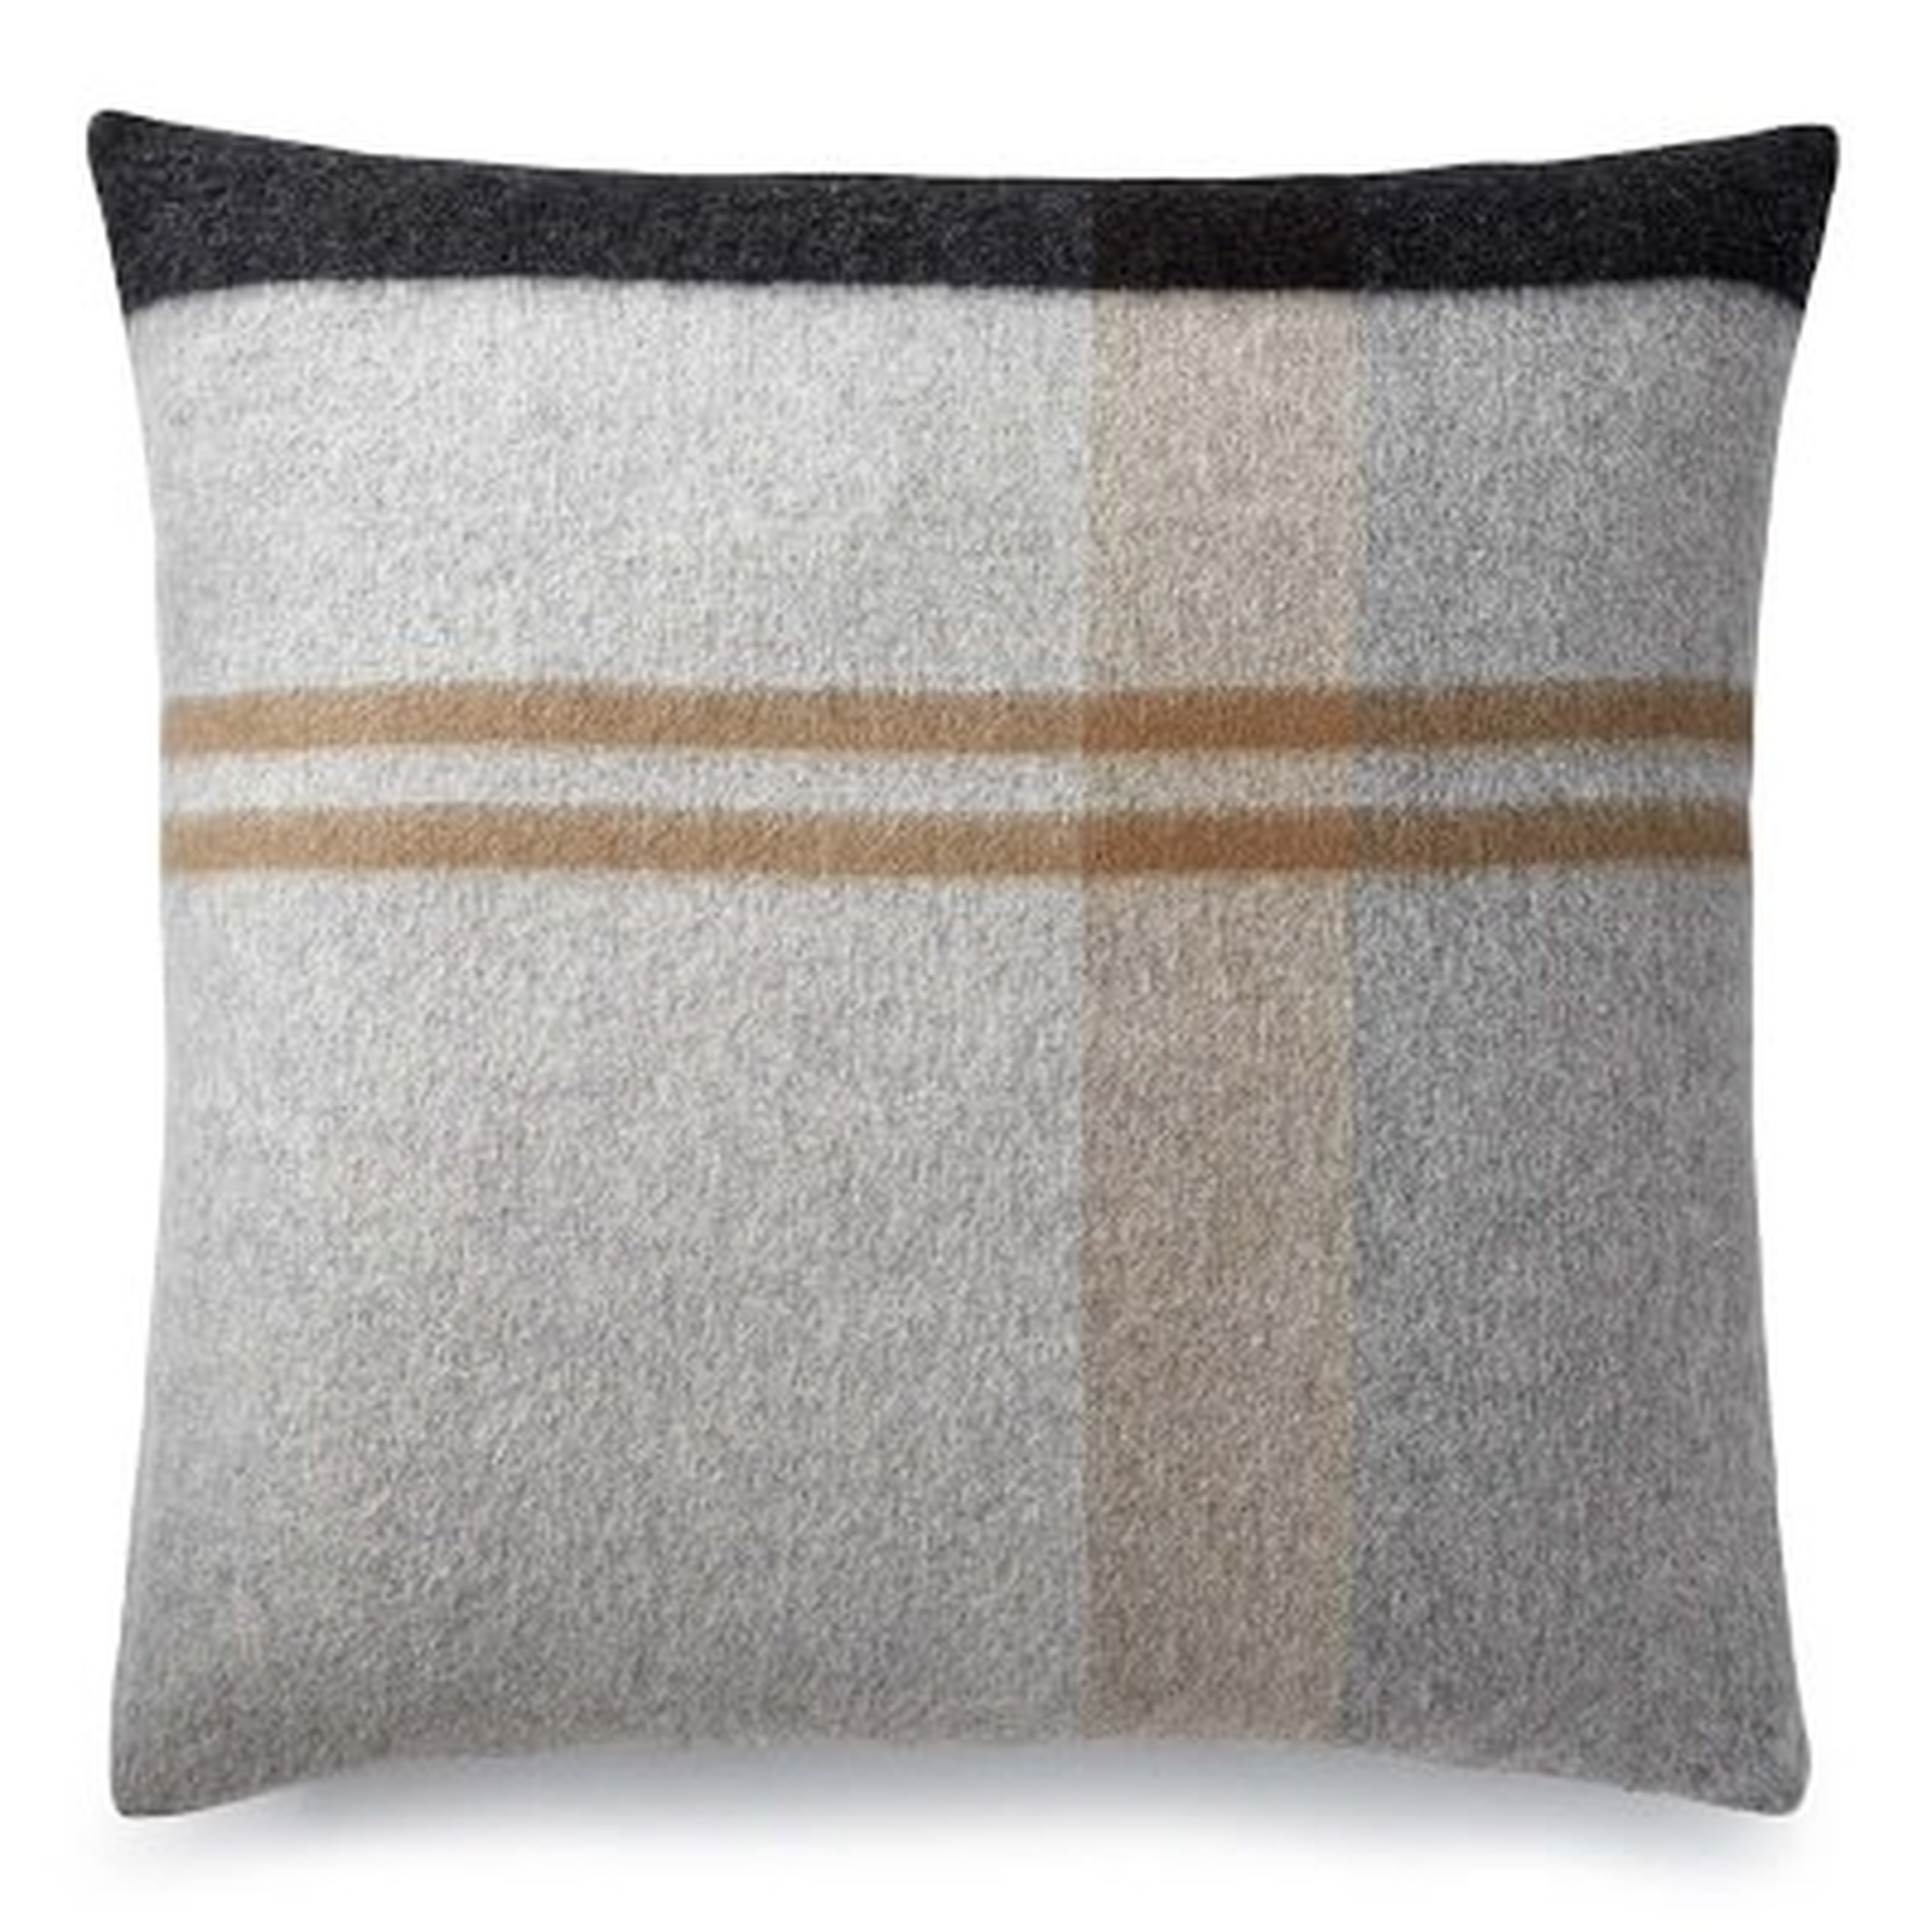 Plaid Lambswool Pillow Cover, 22" X 22", Grayson - Williams Sonoma